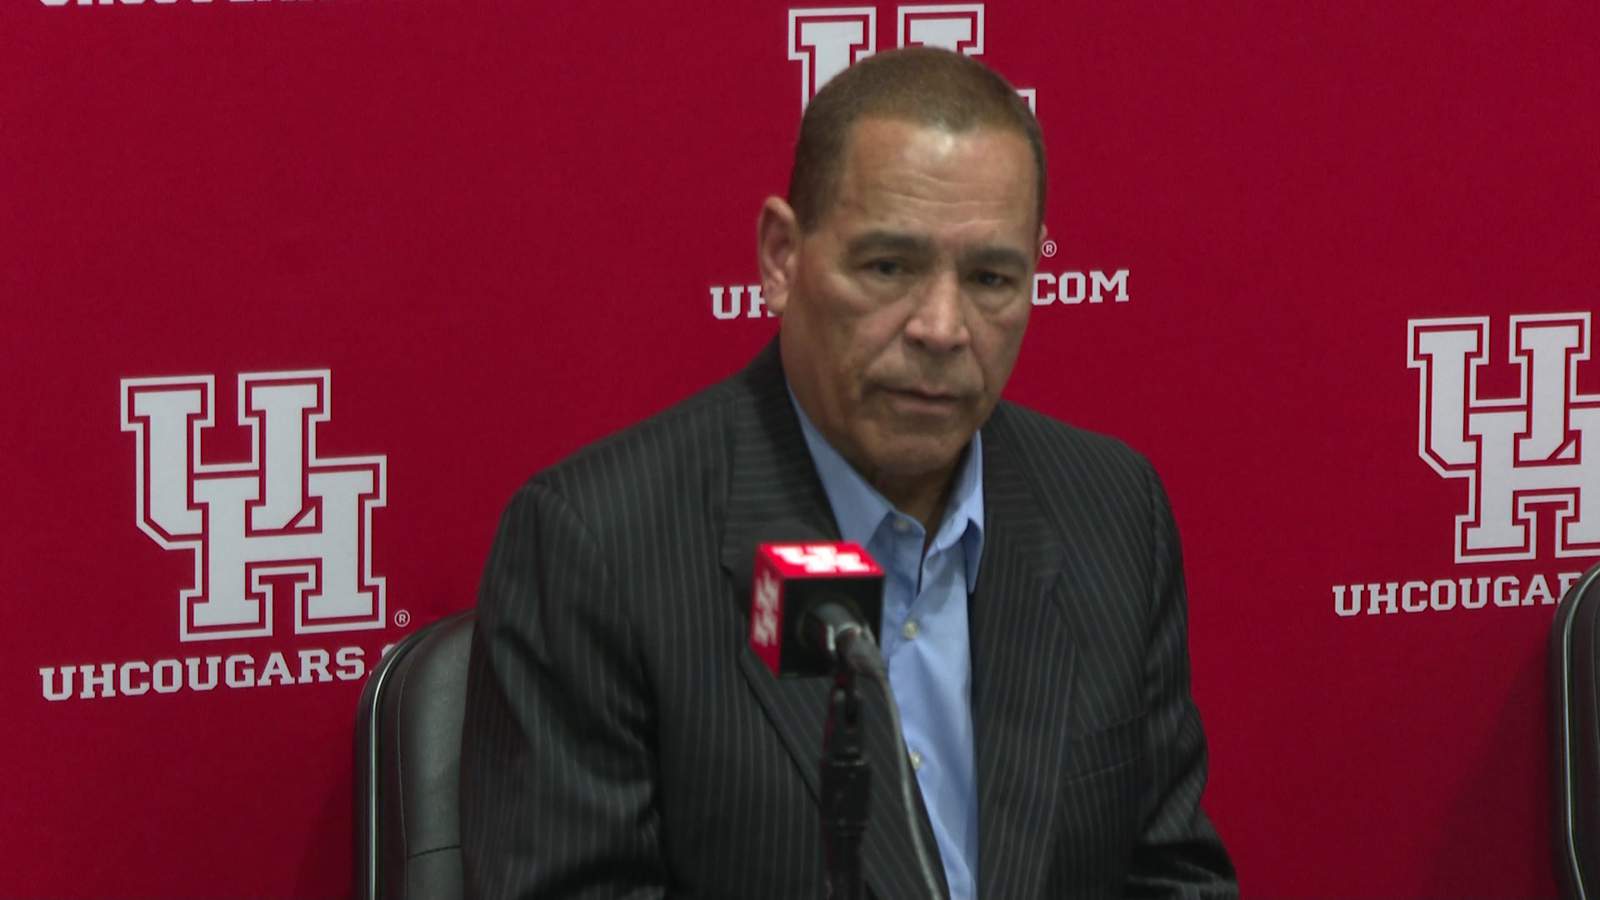 All UH basketball players, some coaches have had COVID-19, team confirms